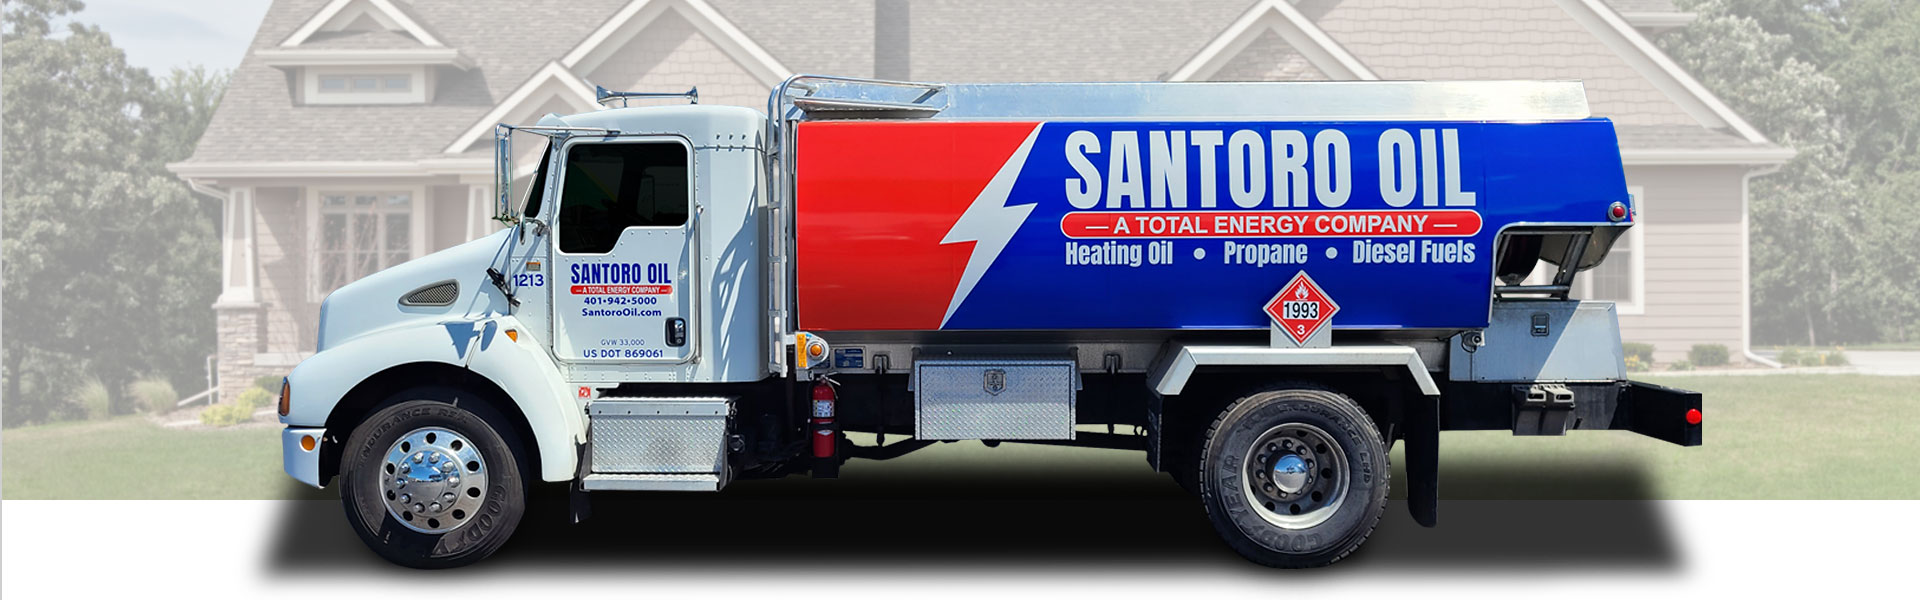 Santoro Oil delivering of Heating Oil to a homeowner in RI or MA